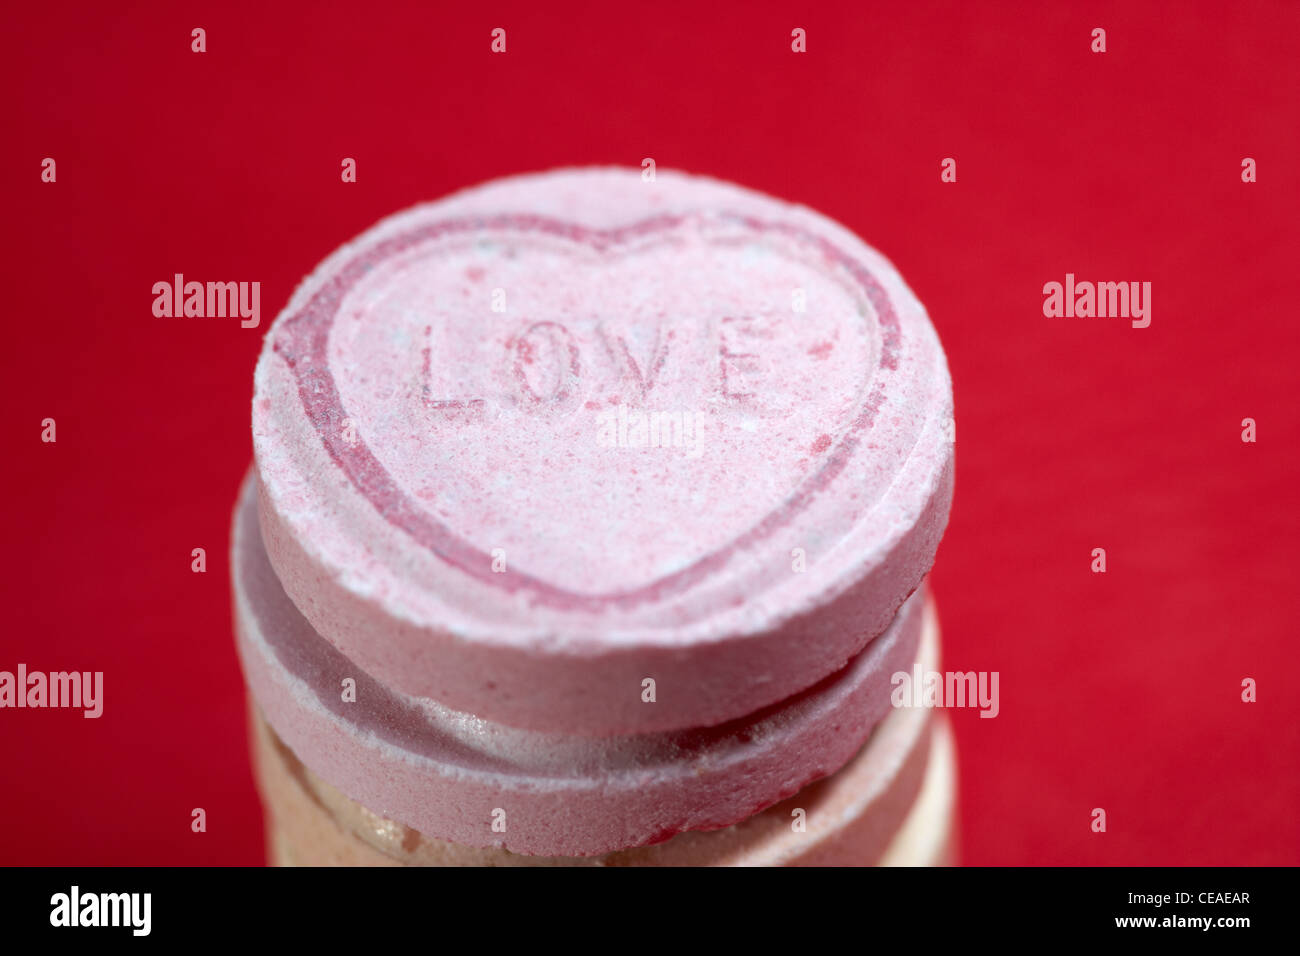 love pink love heart sweet on red background Stock Photo